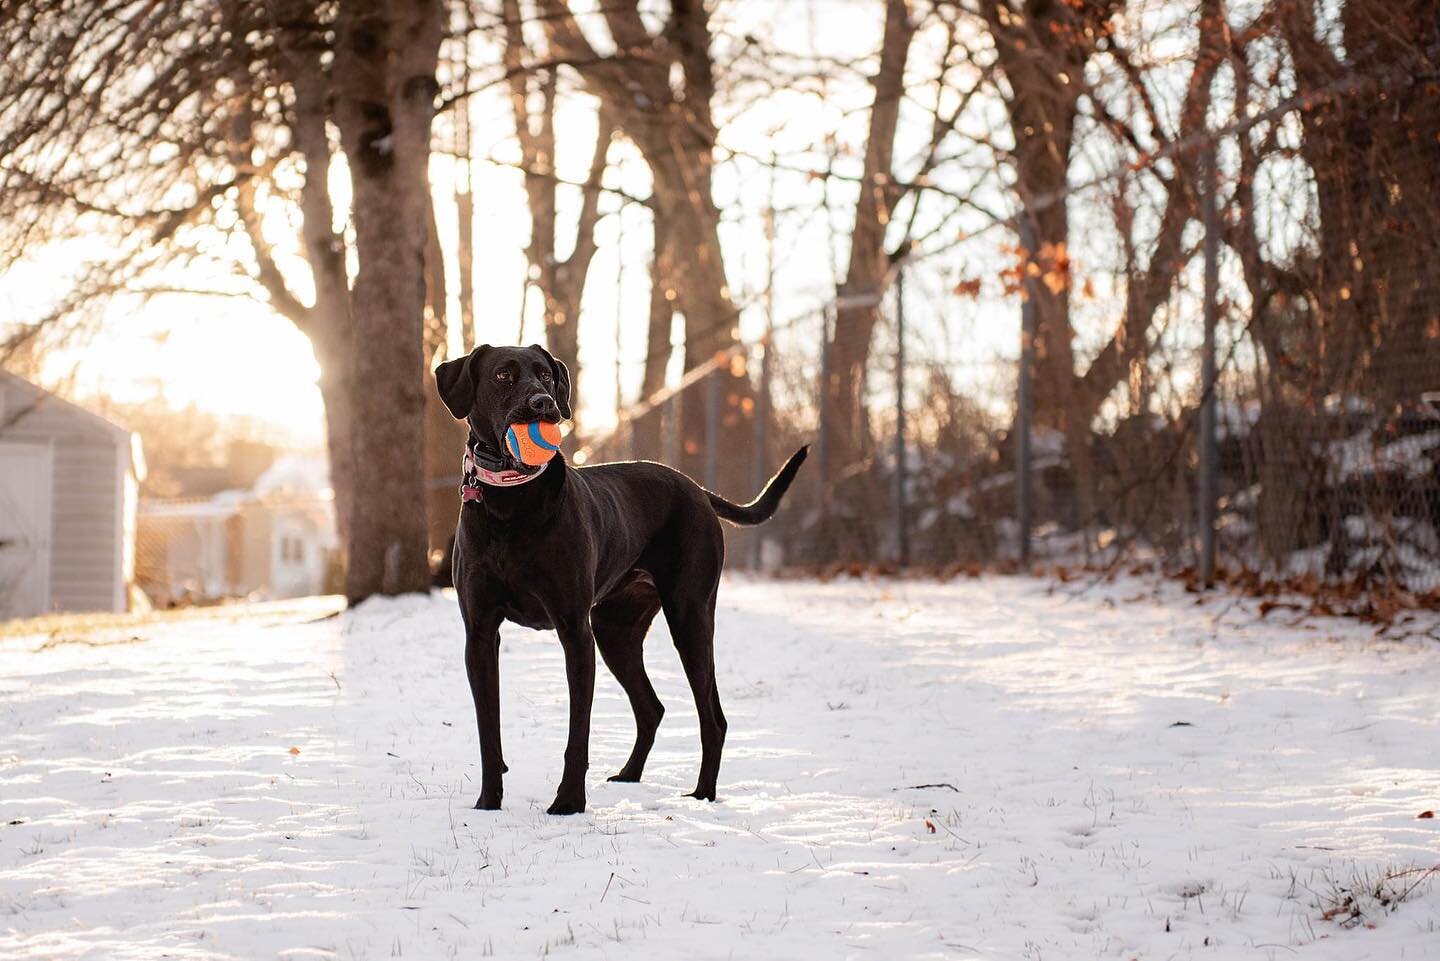 Forgot to post this image from yesterday of my sweet girl Stella . We finally got some more snow and I loved the light coming in our yard just before sunset.. 🐾💕
.
.
.
#stellamoonphotography 
#nhphotographer 
#dogsofinstagram 
#hairofthedog 
#sunse